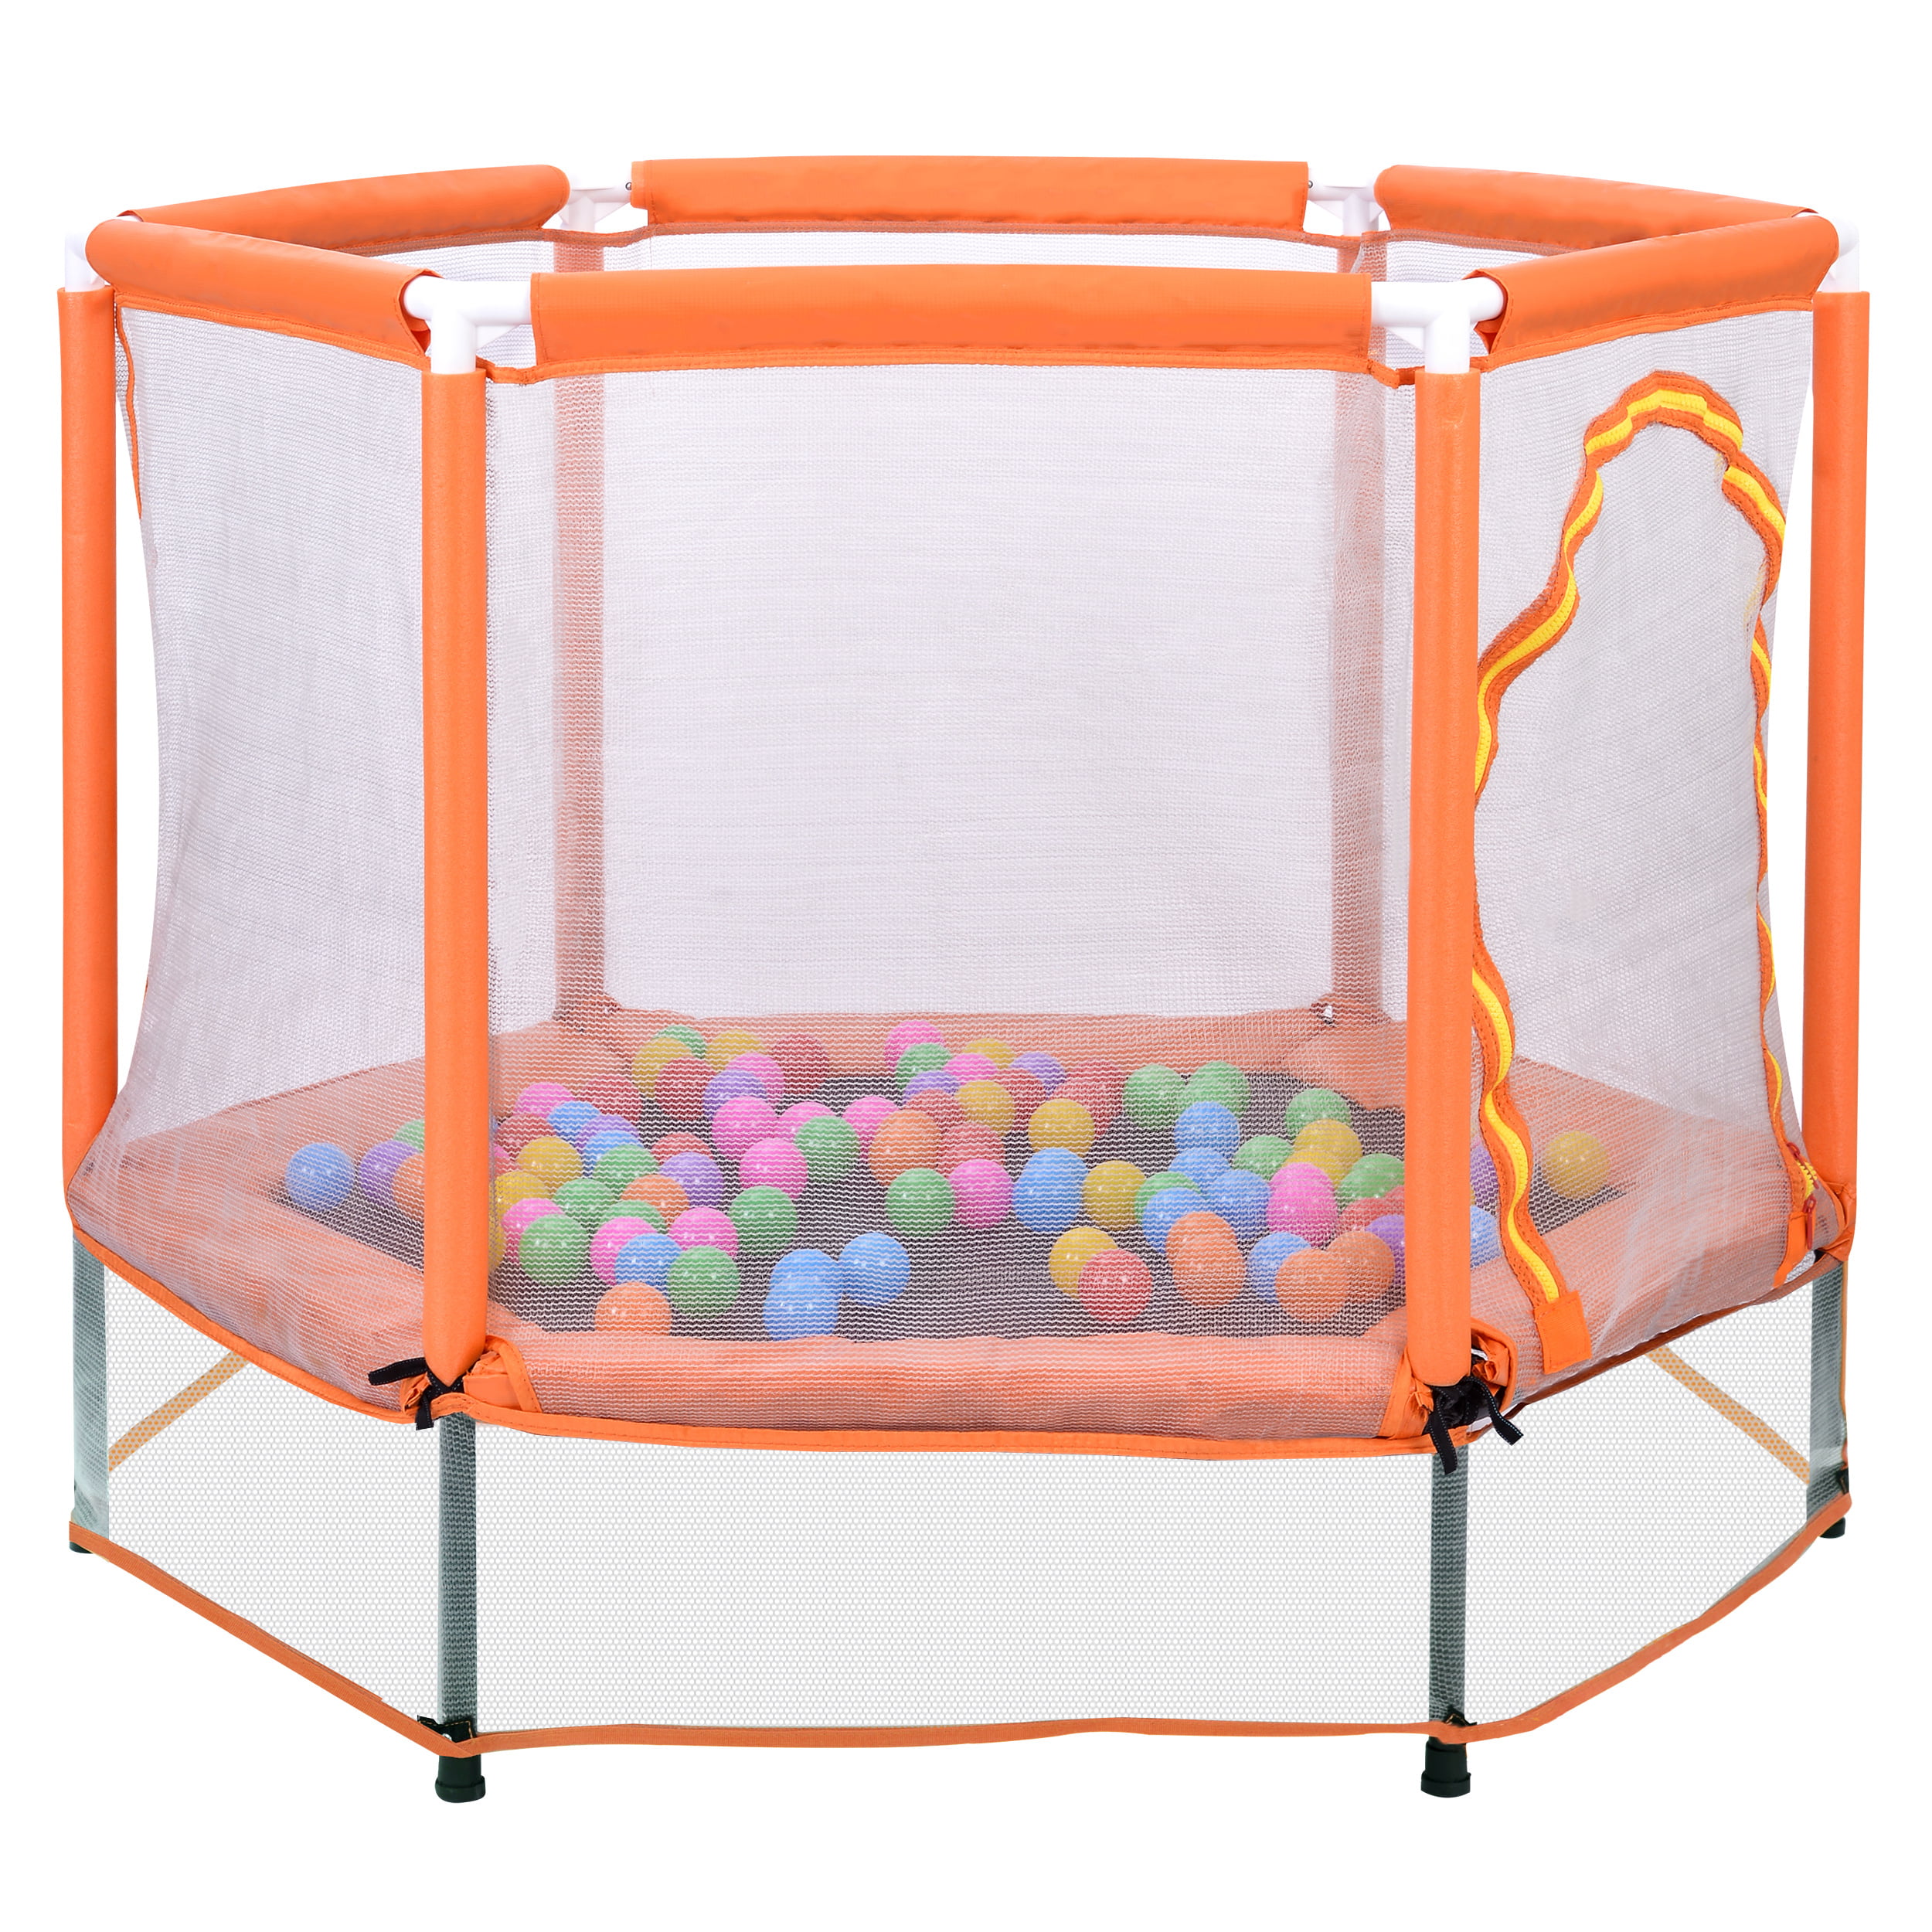 Never Landing 55 Trampoline for Kids Toddler with Enclosure Net and Safety Pad Indoor Outdoor Gift for Kids 